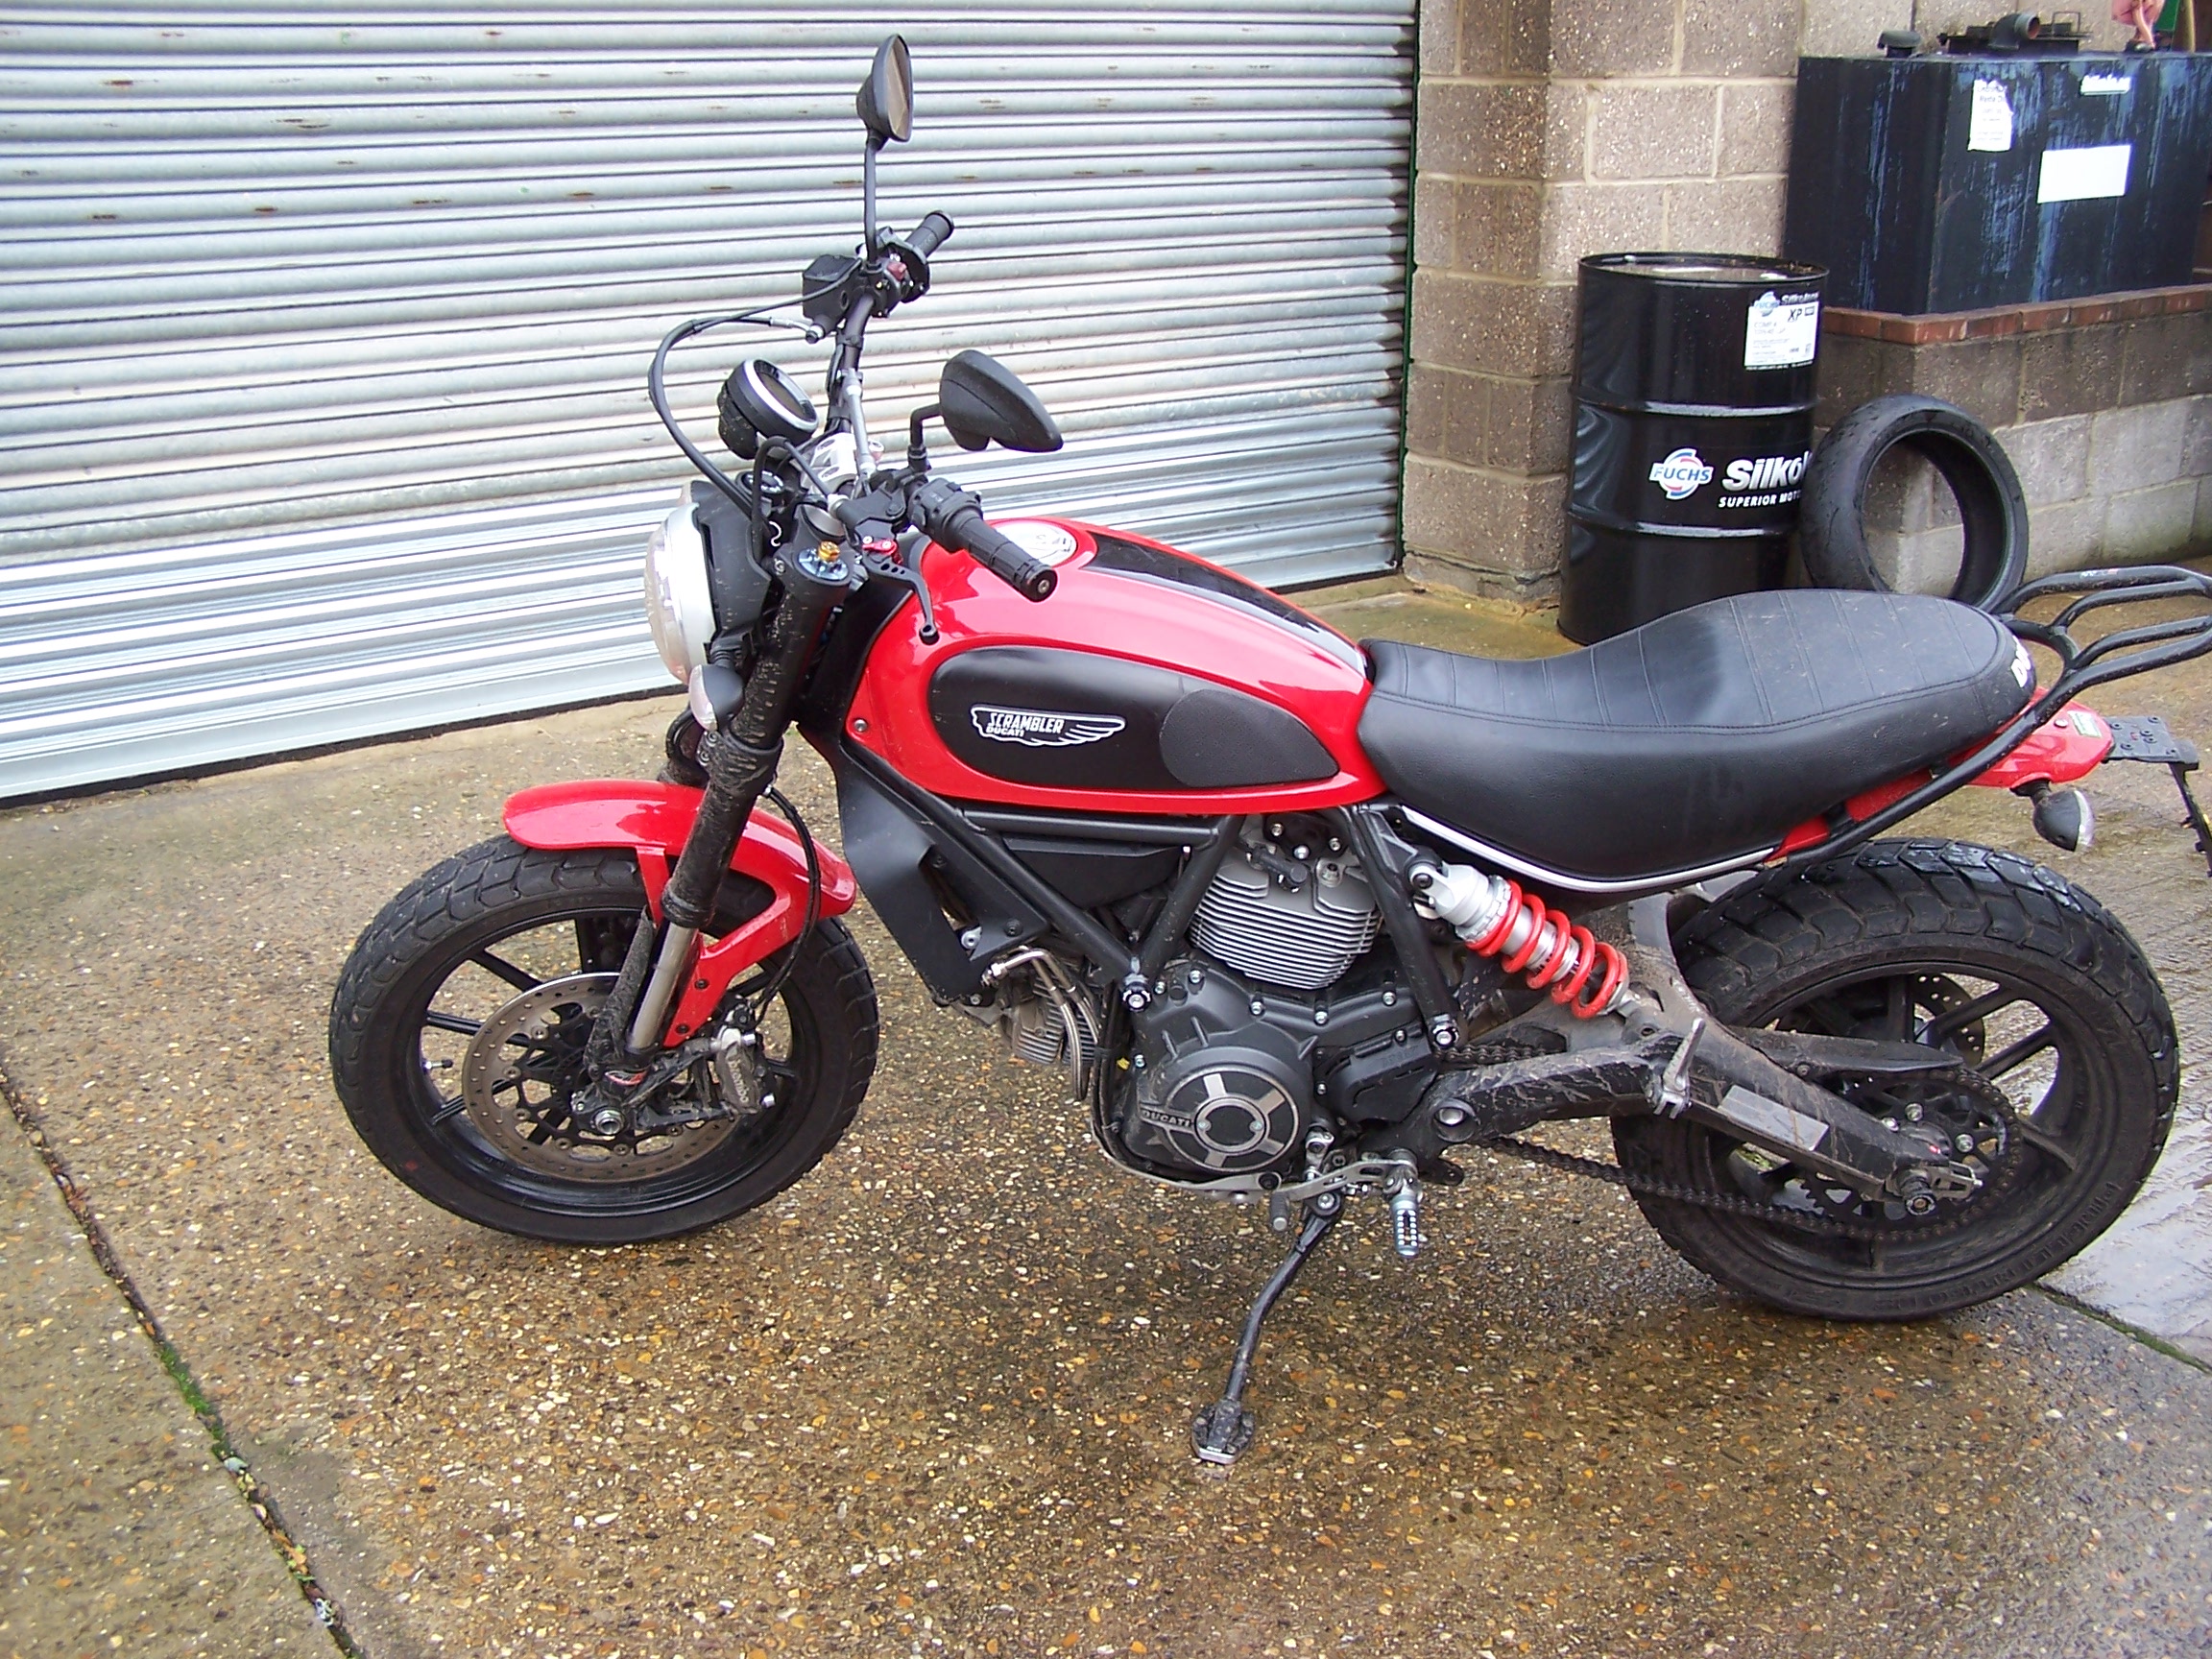 Ducati Scrambler ECU remap – the first one! And the snatchy bottom end is cured.